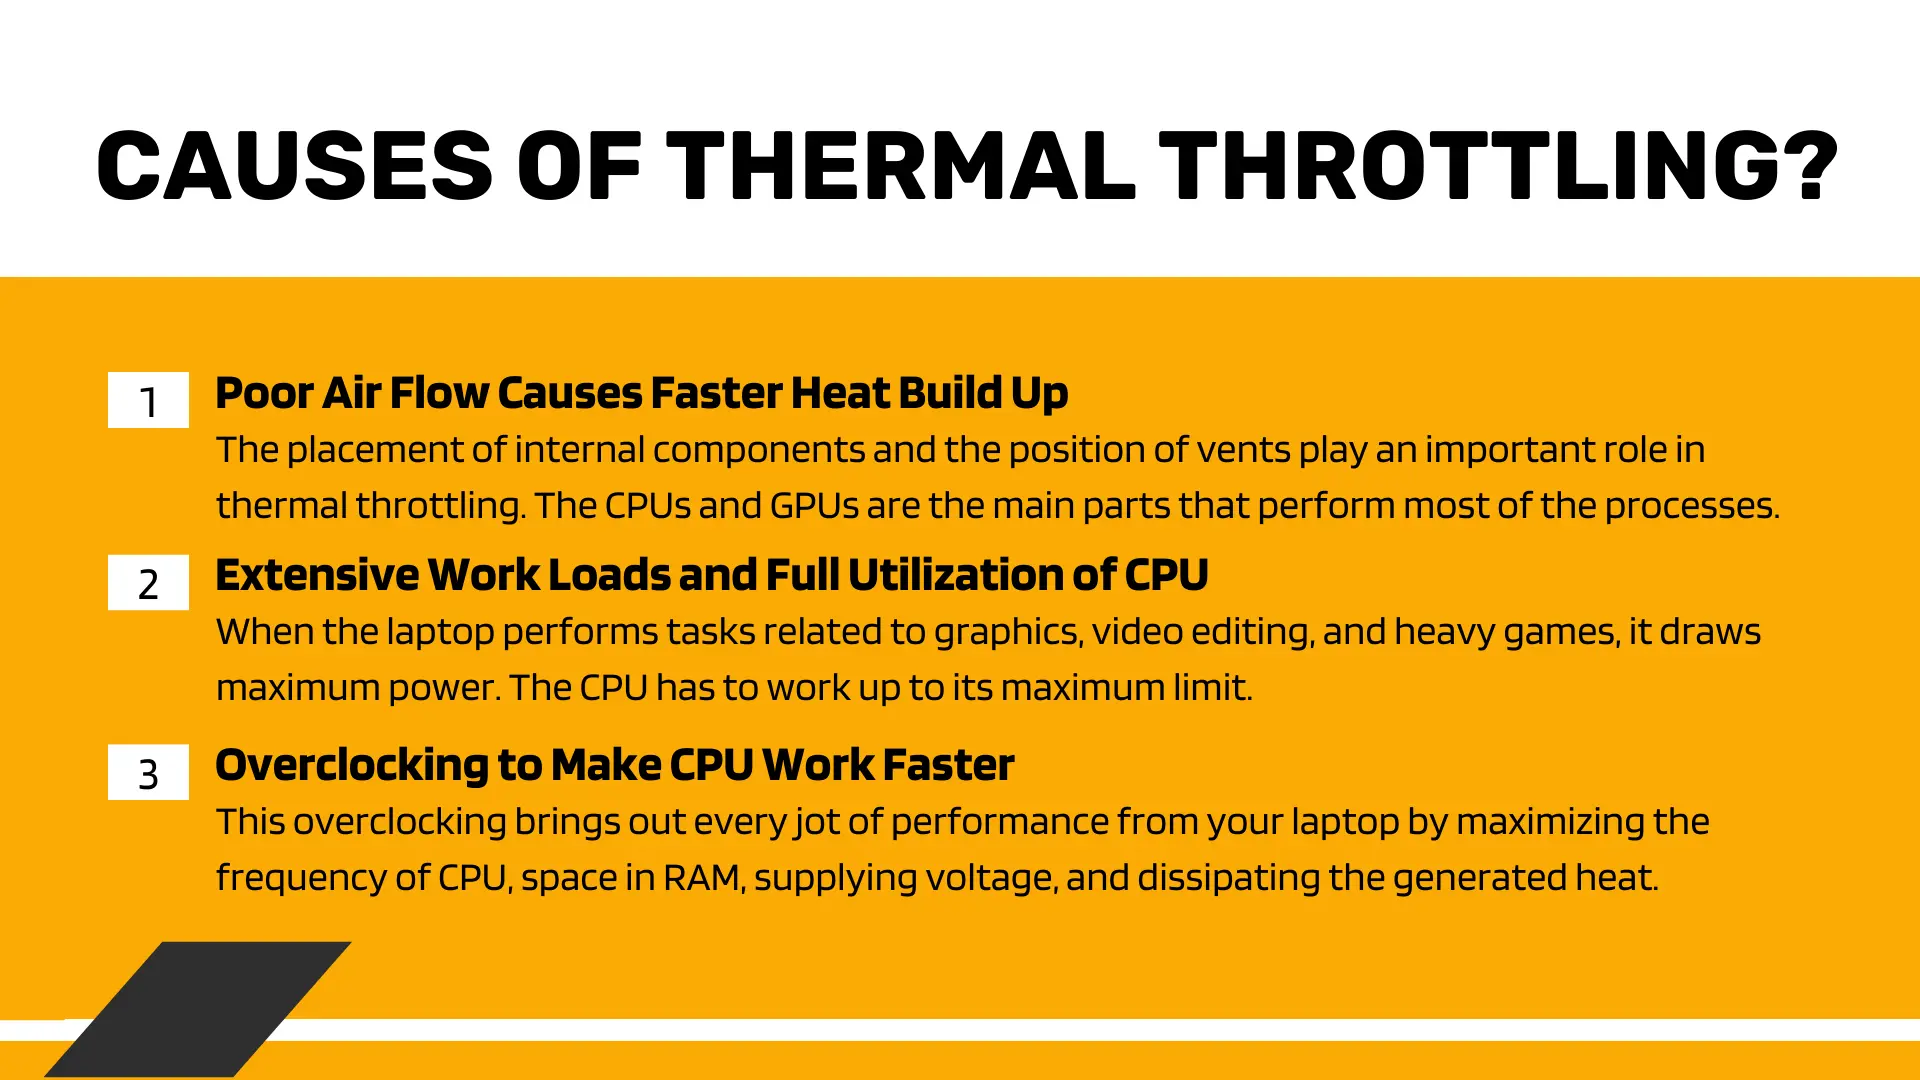 Causes of Thermal Throttling